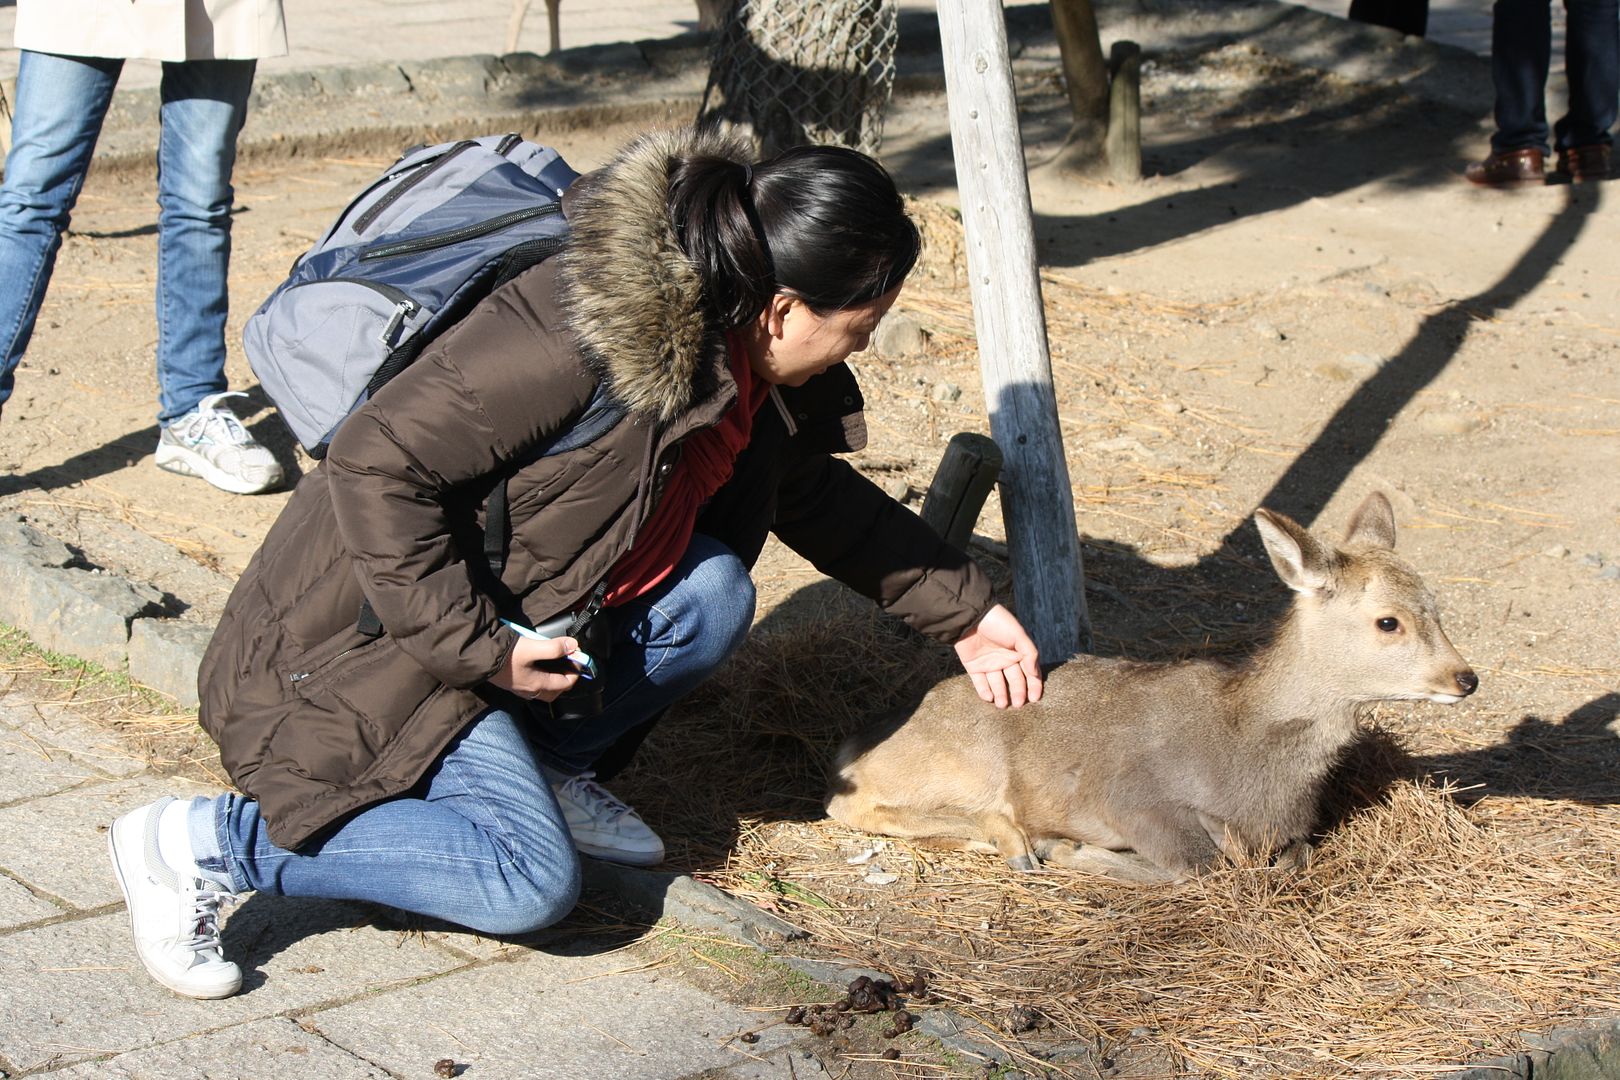 Claire saying hi to the deer in Nara, Japan photo 2013-12-22183111_zps49a537c1.jpg